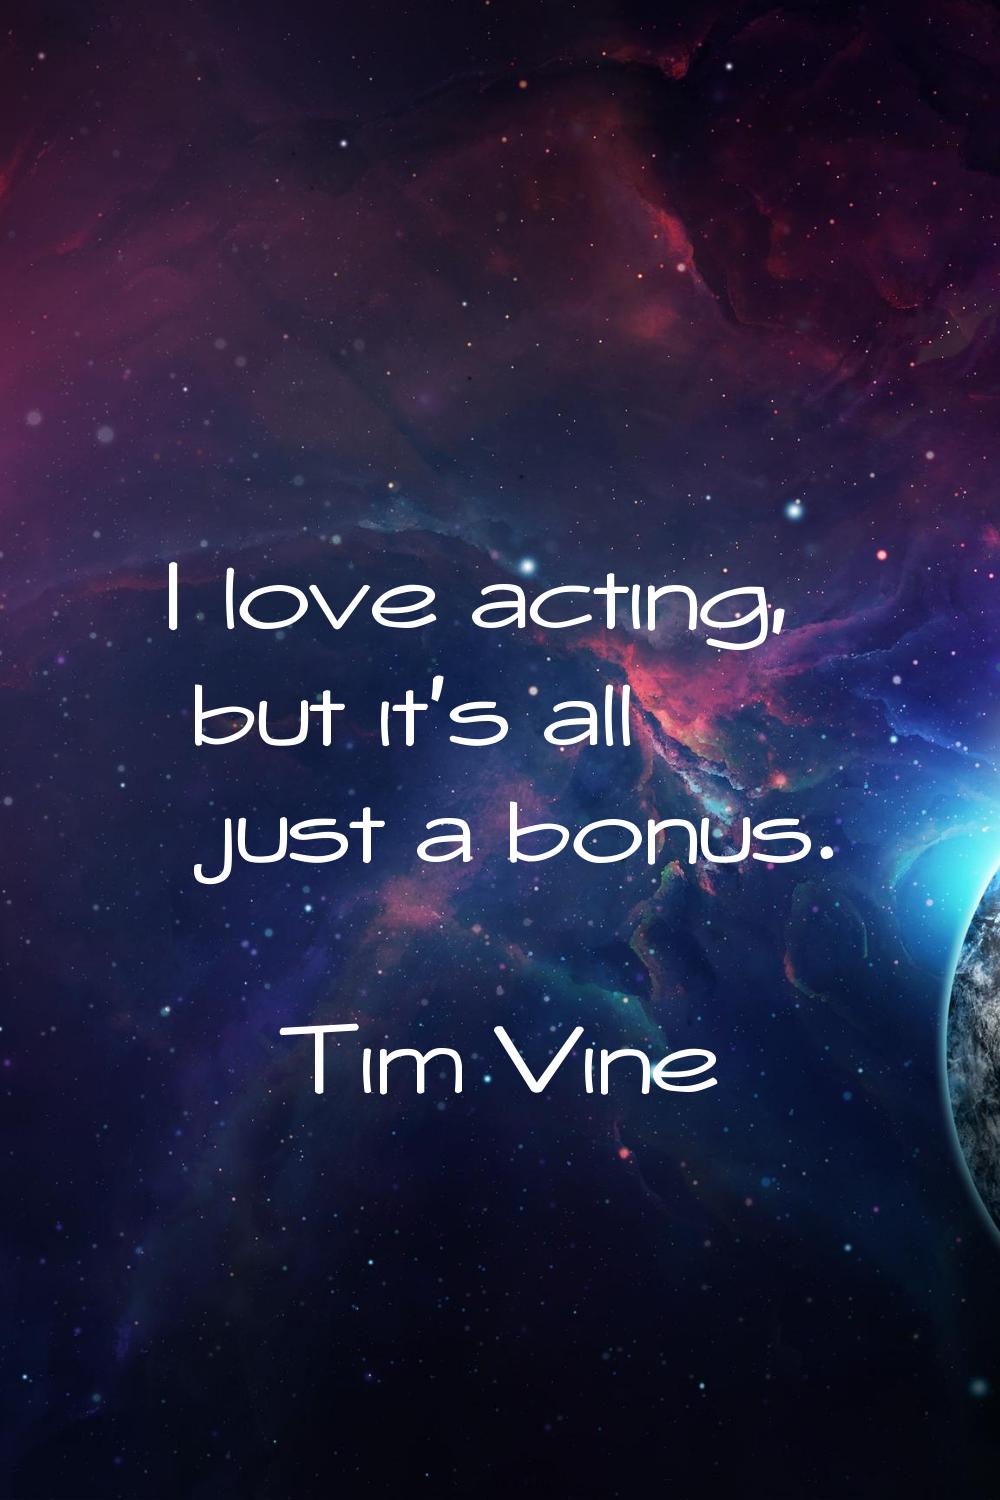 I love acting, but it's all just a bonus.